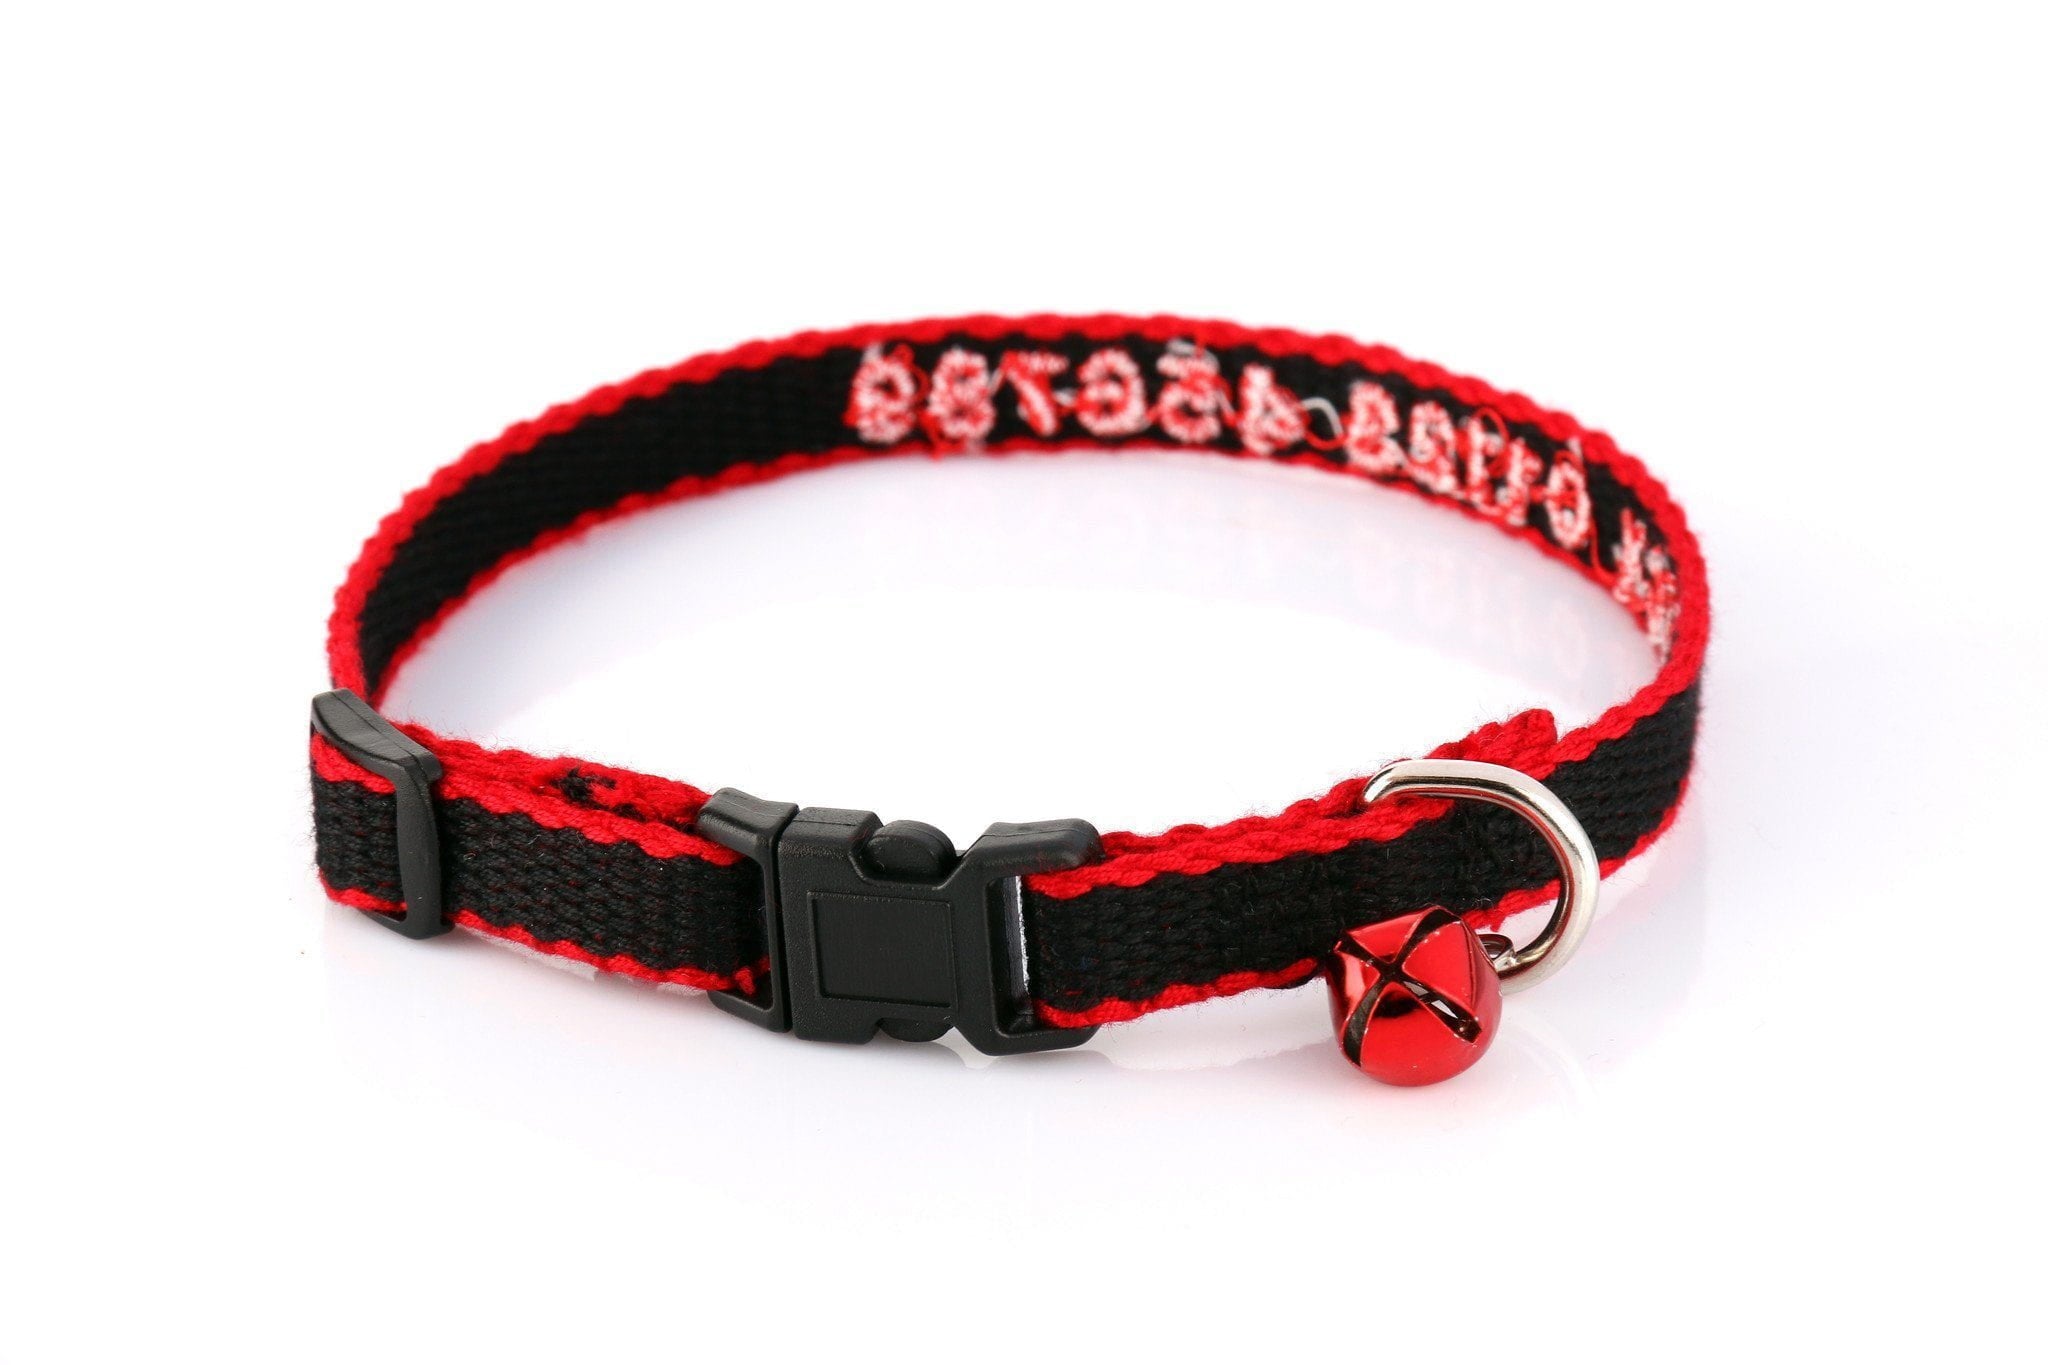 Personalized Dog Collar - Embroidered - Nylon - Classic Styling – Snazzy  Fido